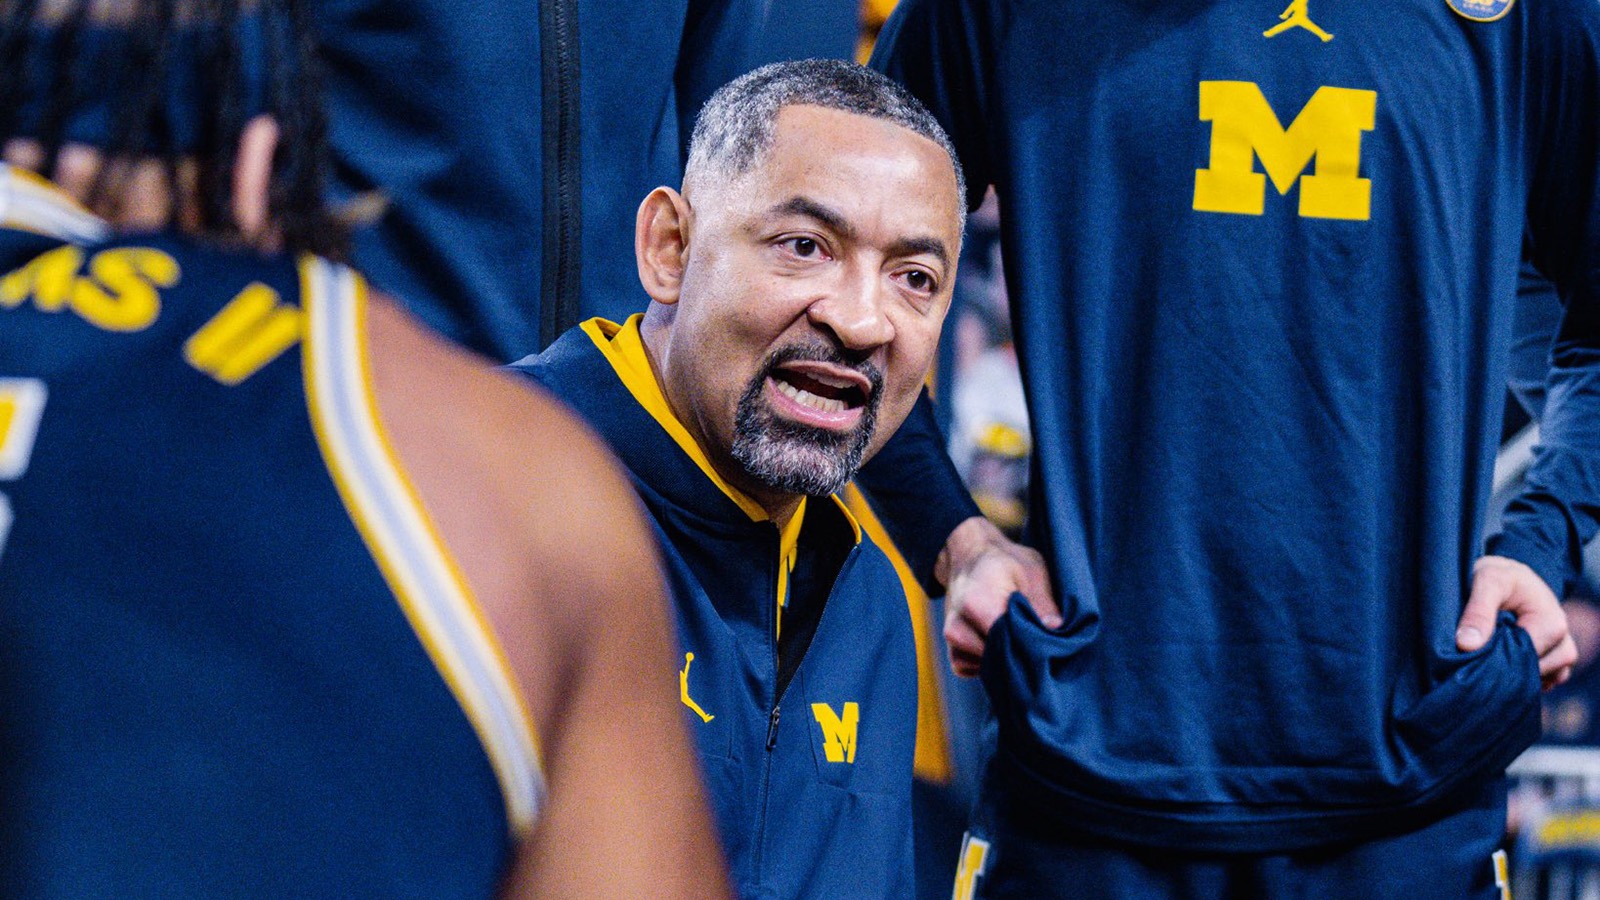 Juwan Howard Went to Heart Surgery: Widespread Support Pours In